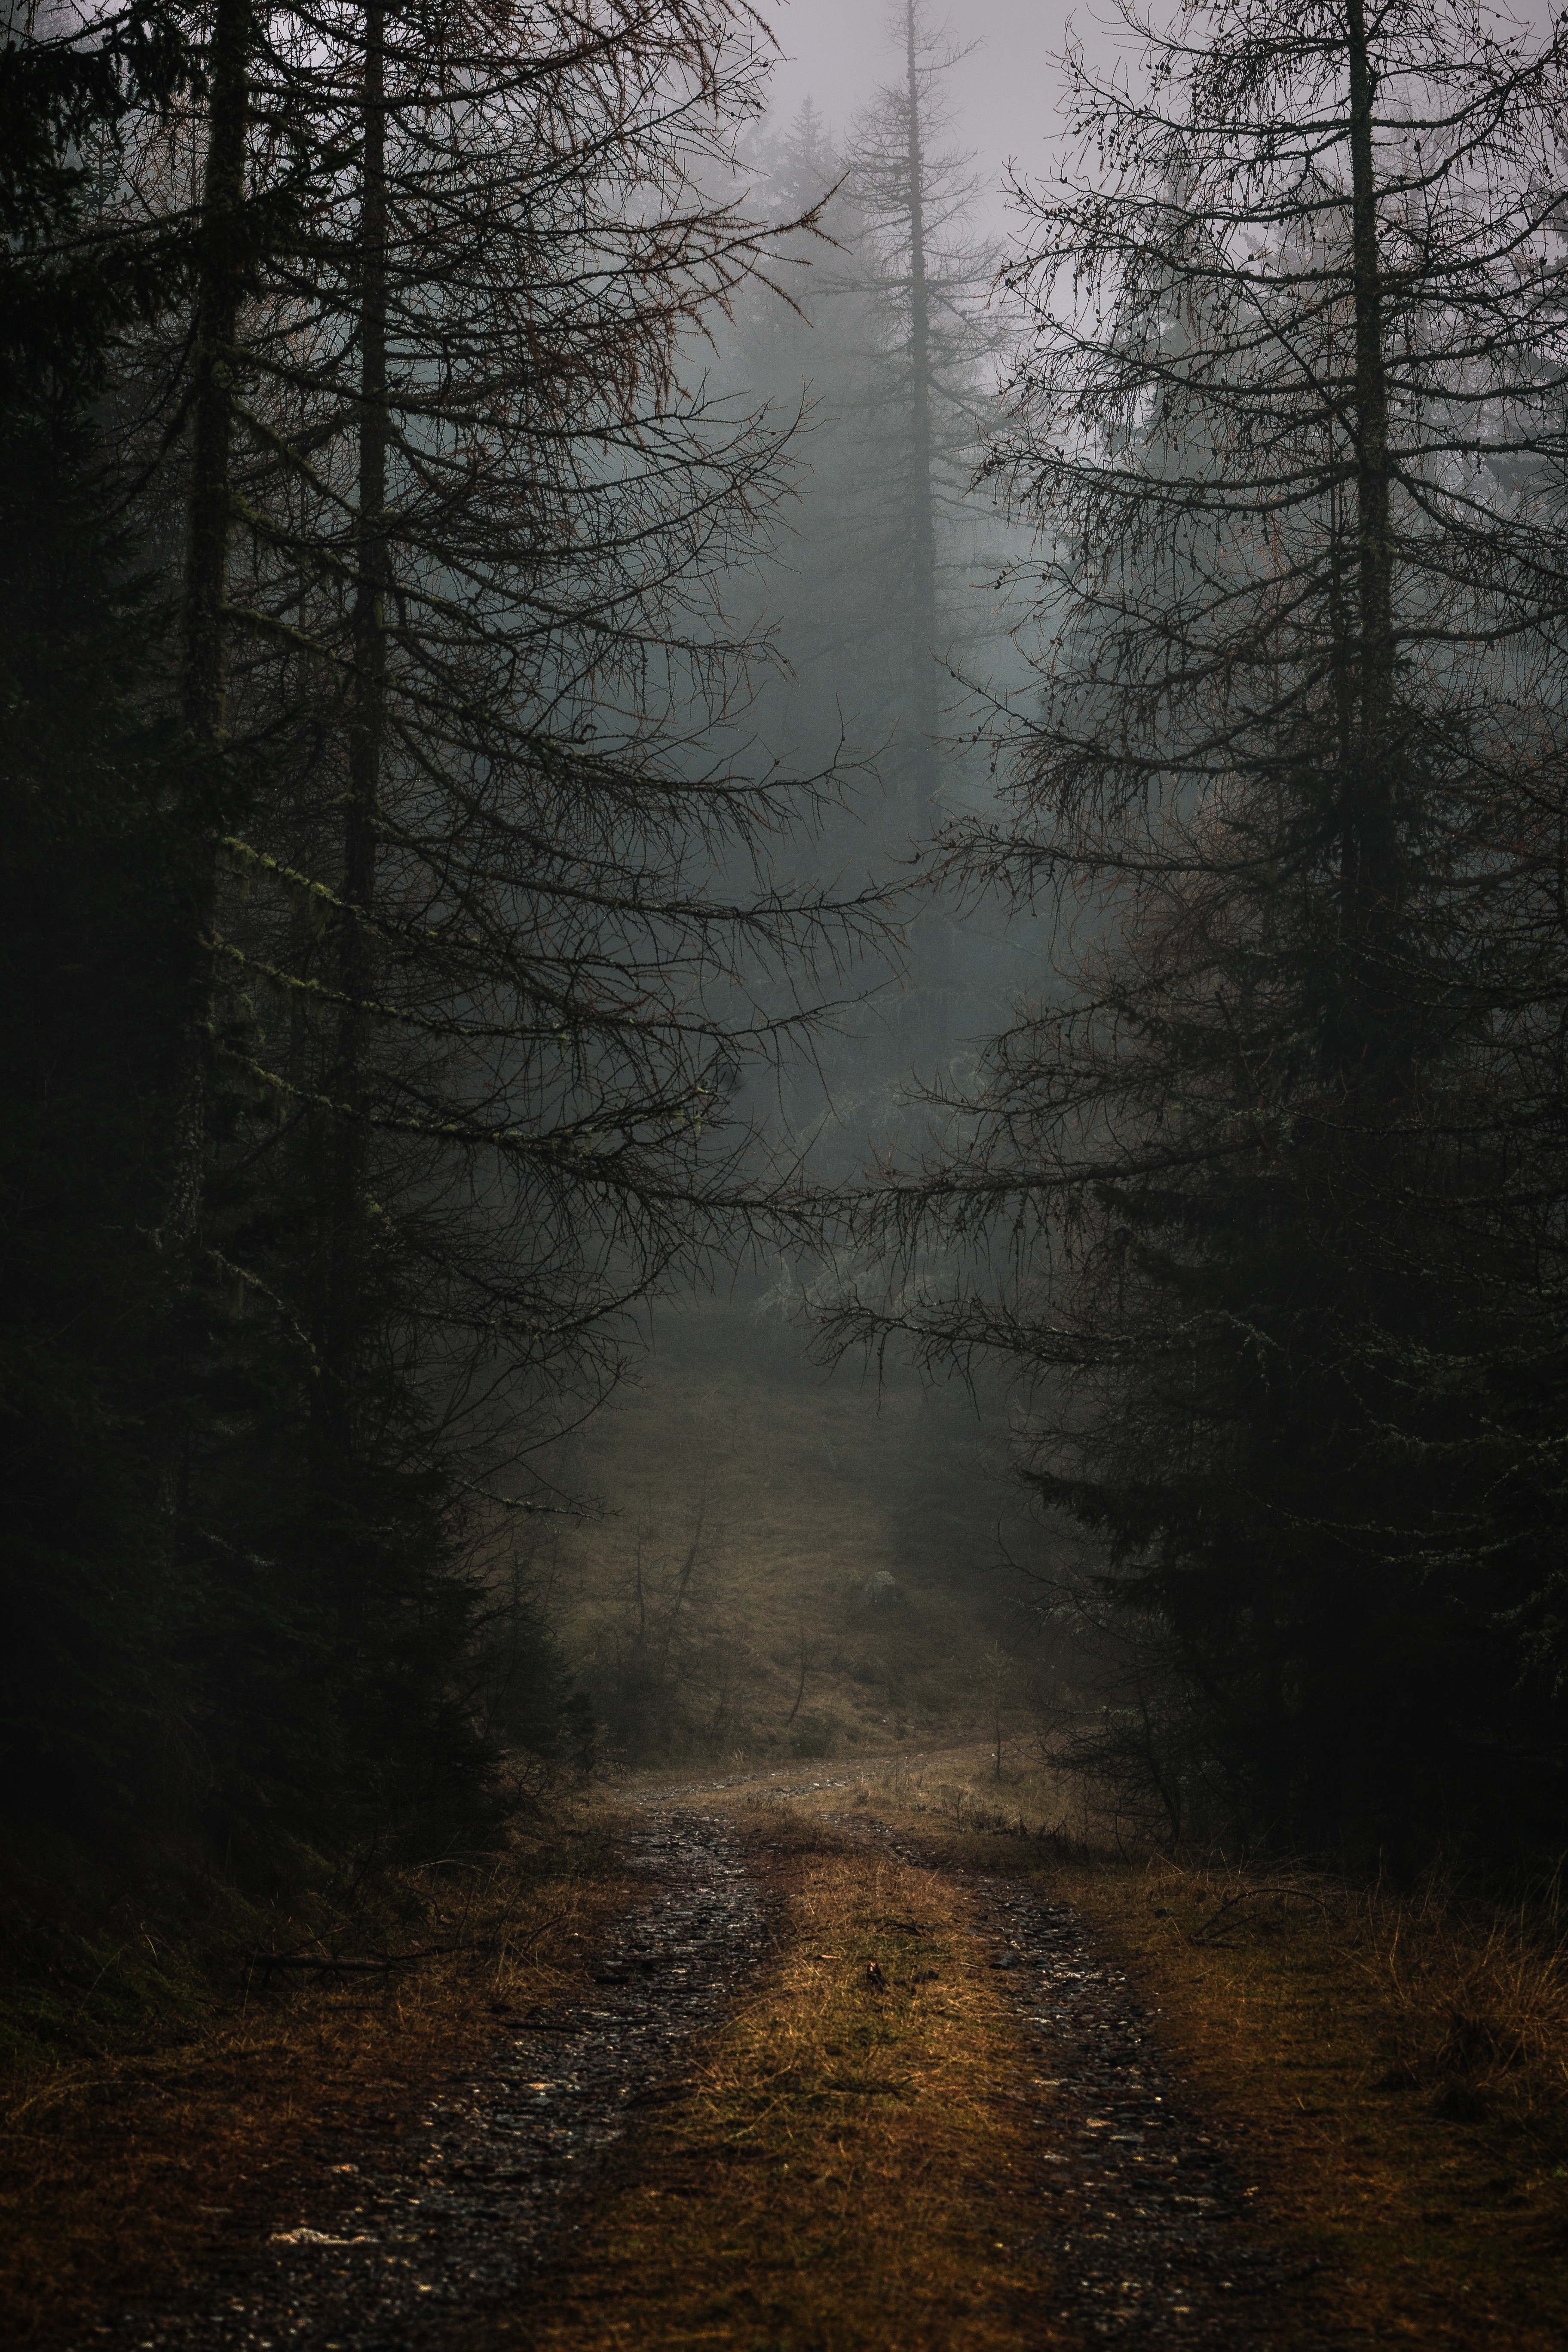 fog, nature, autumn, gloomy, trees, forest, branches, path